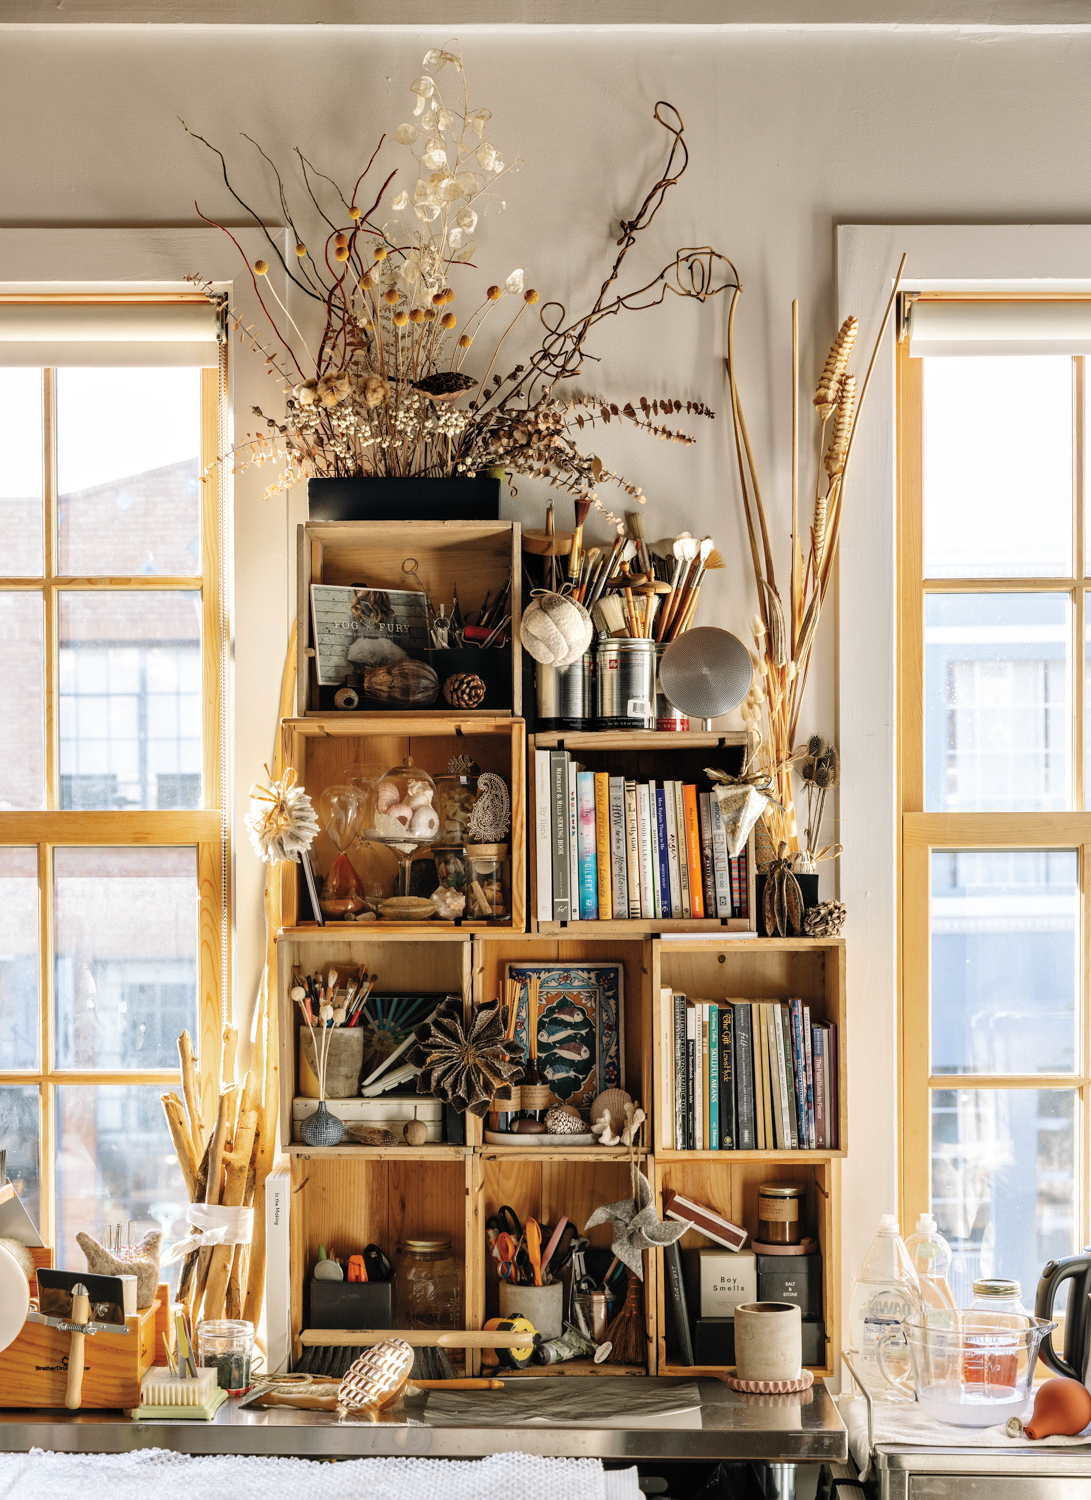 Kristin Kelly Colombano stocks her wooden shelves with books, plants and other accessories